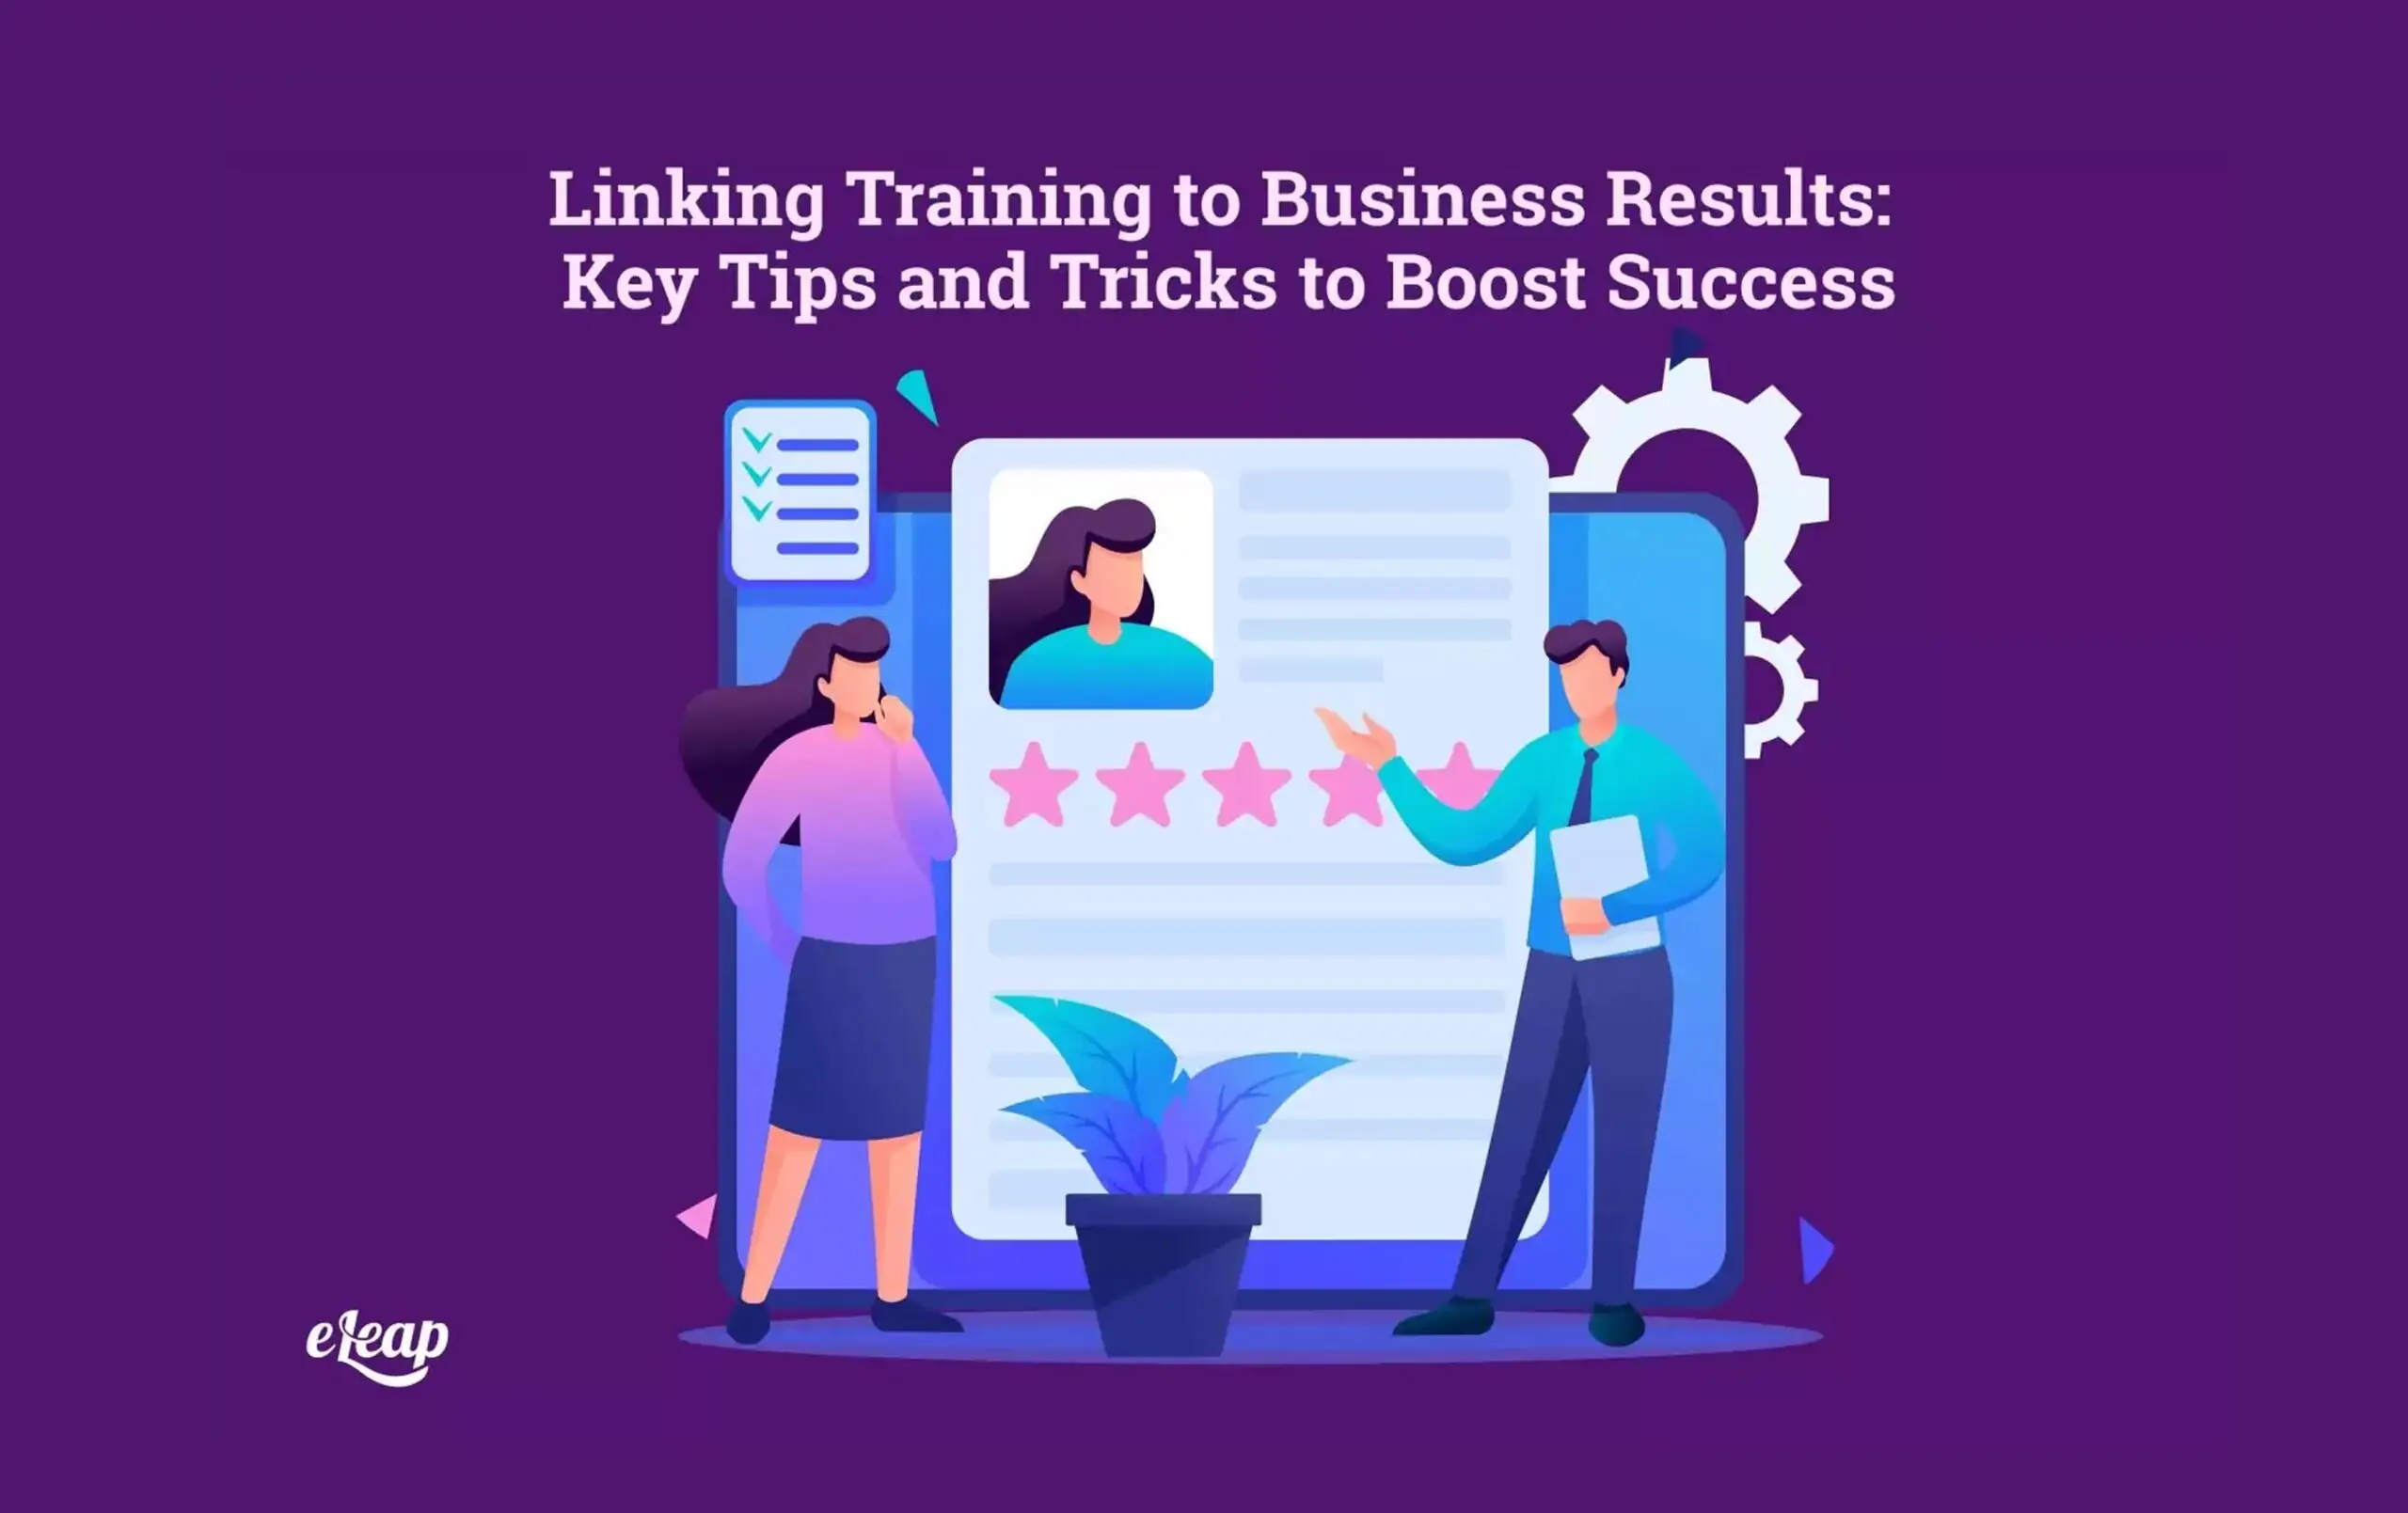 Linking Training to Business Results: Key Tips and Tricks to Boost Success